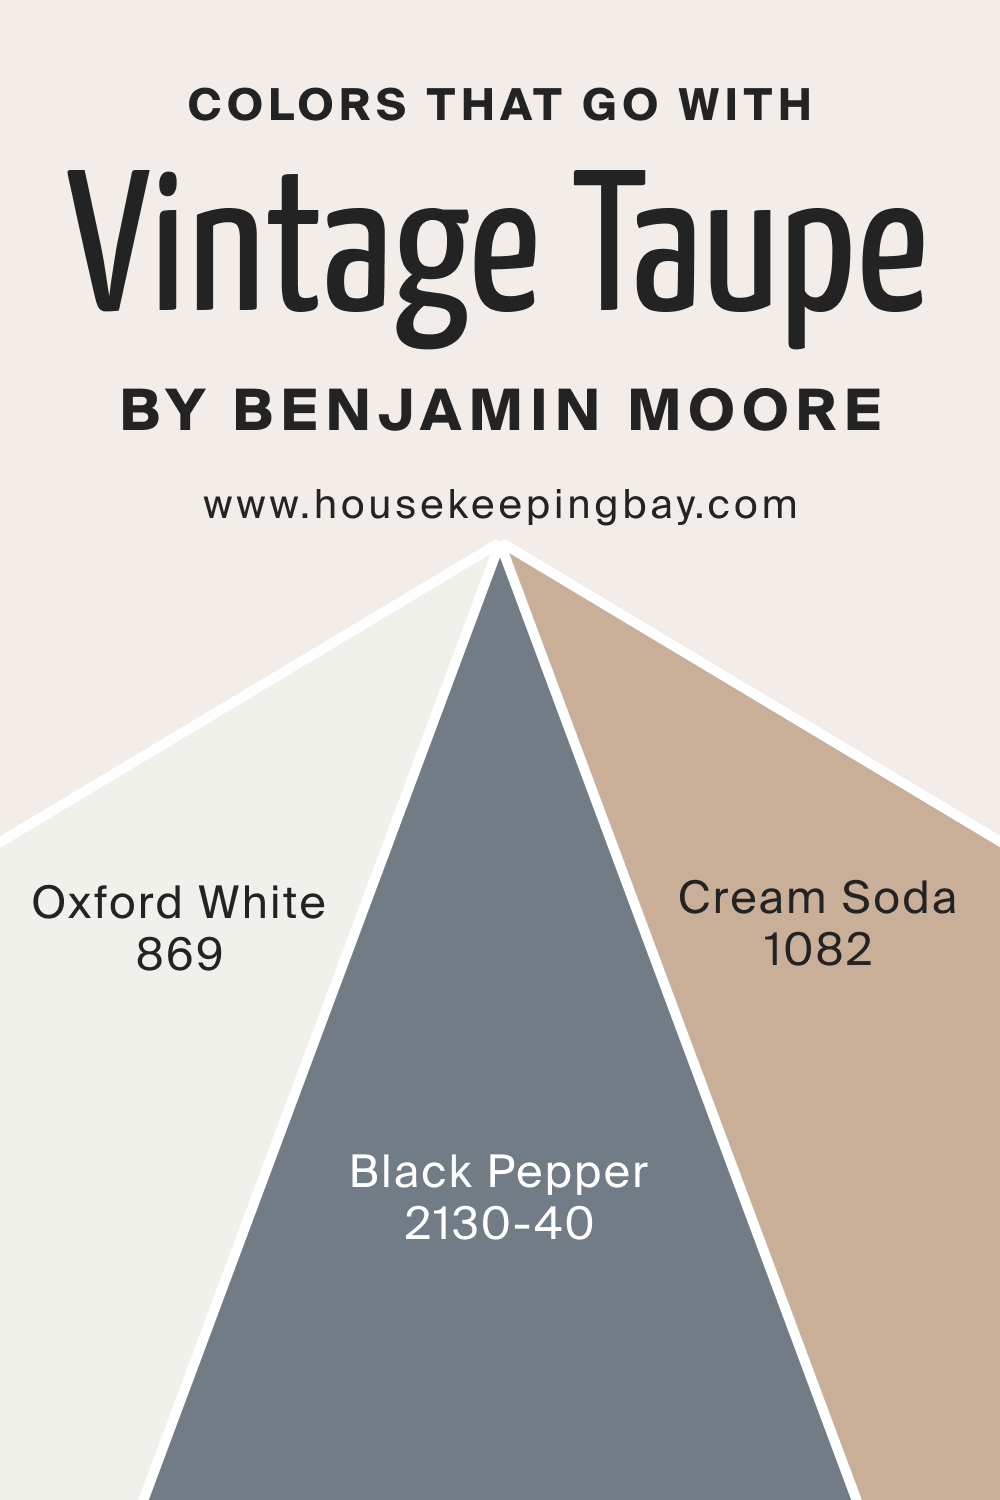 Colors that goes with Vintage Taupe 2110 70 by Benjamin Moore